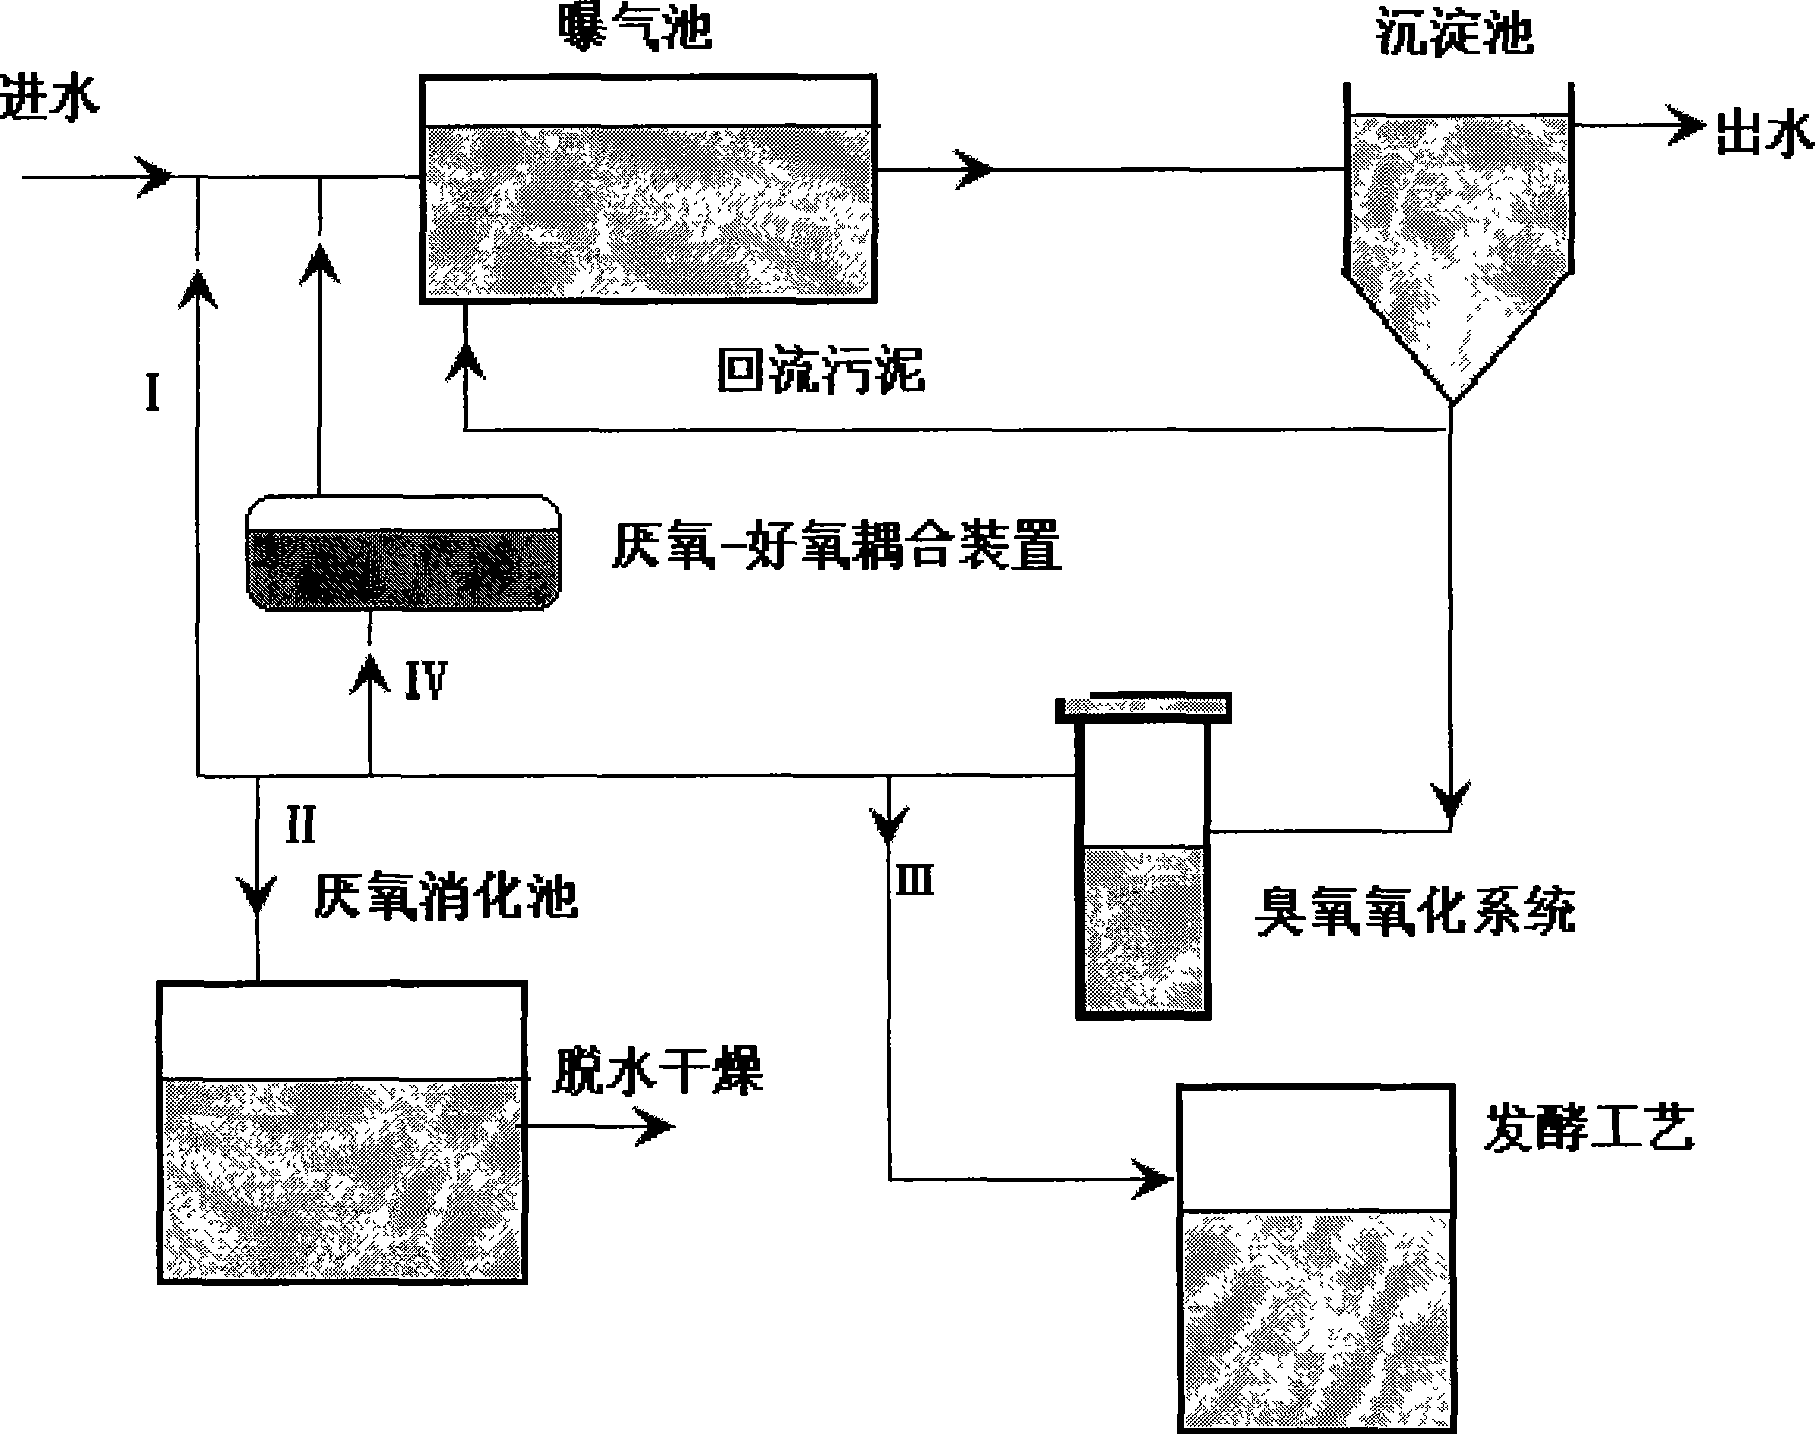 Method for dissolving biological cell in sludge and use thereof